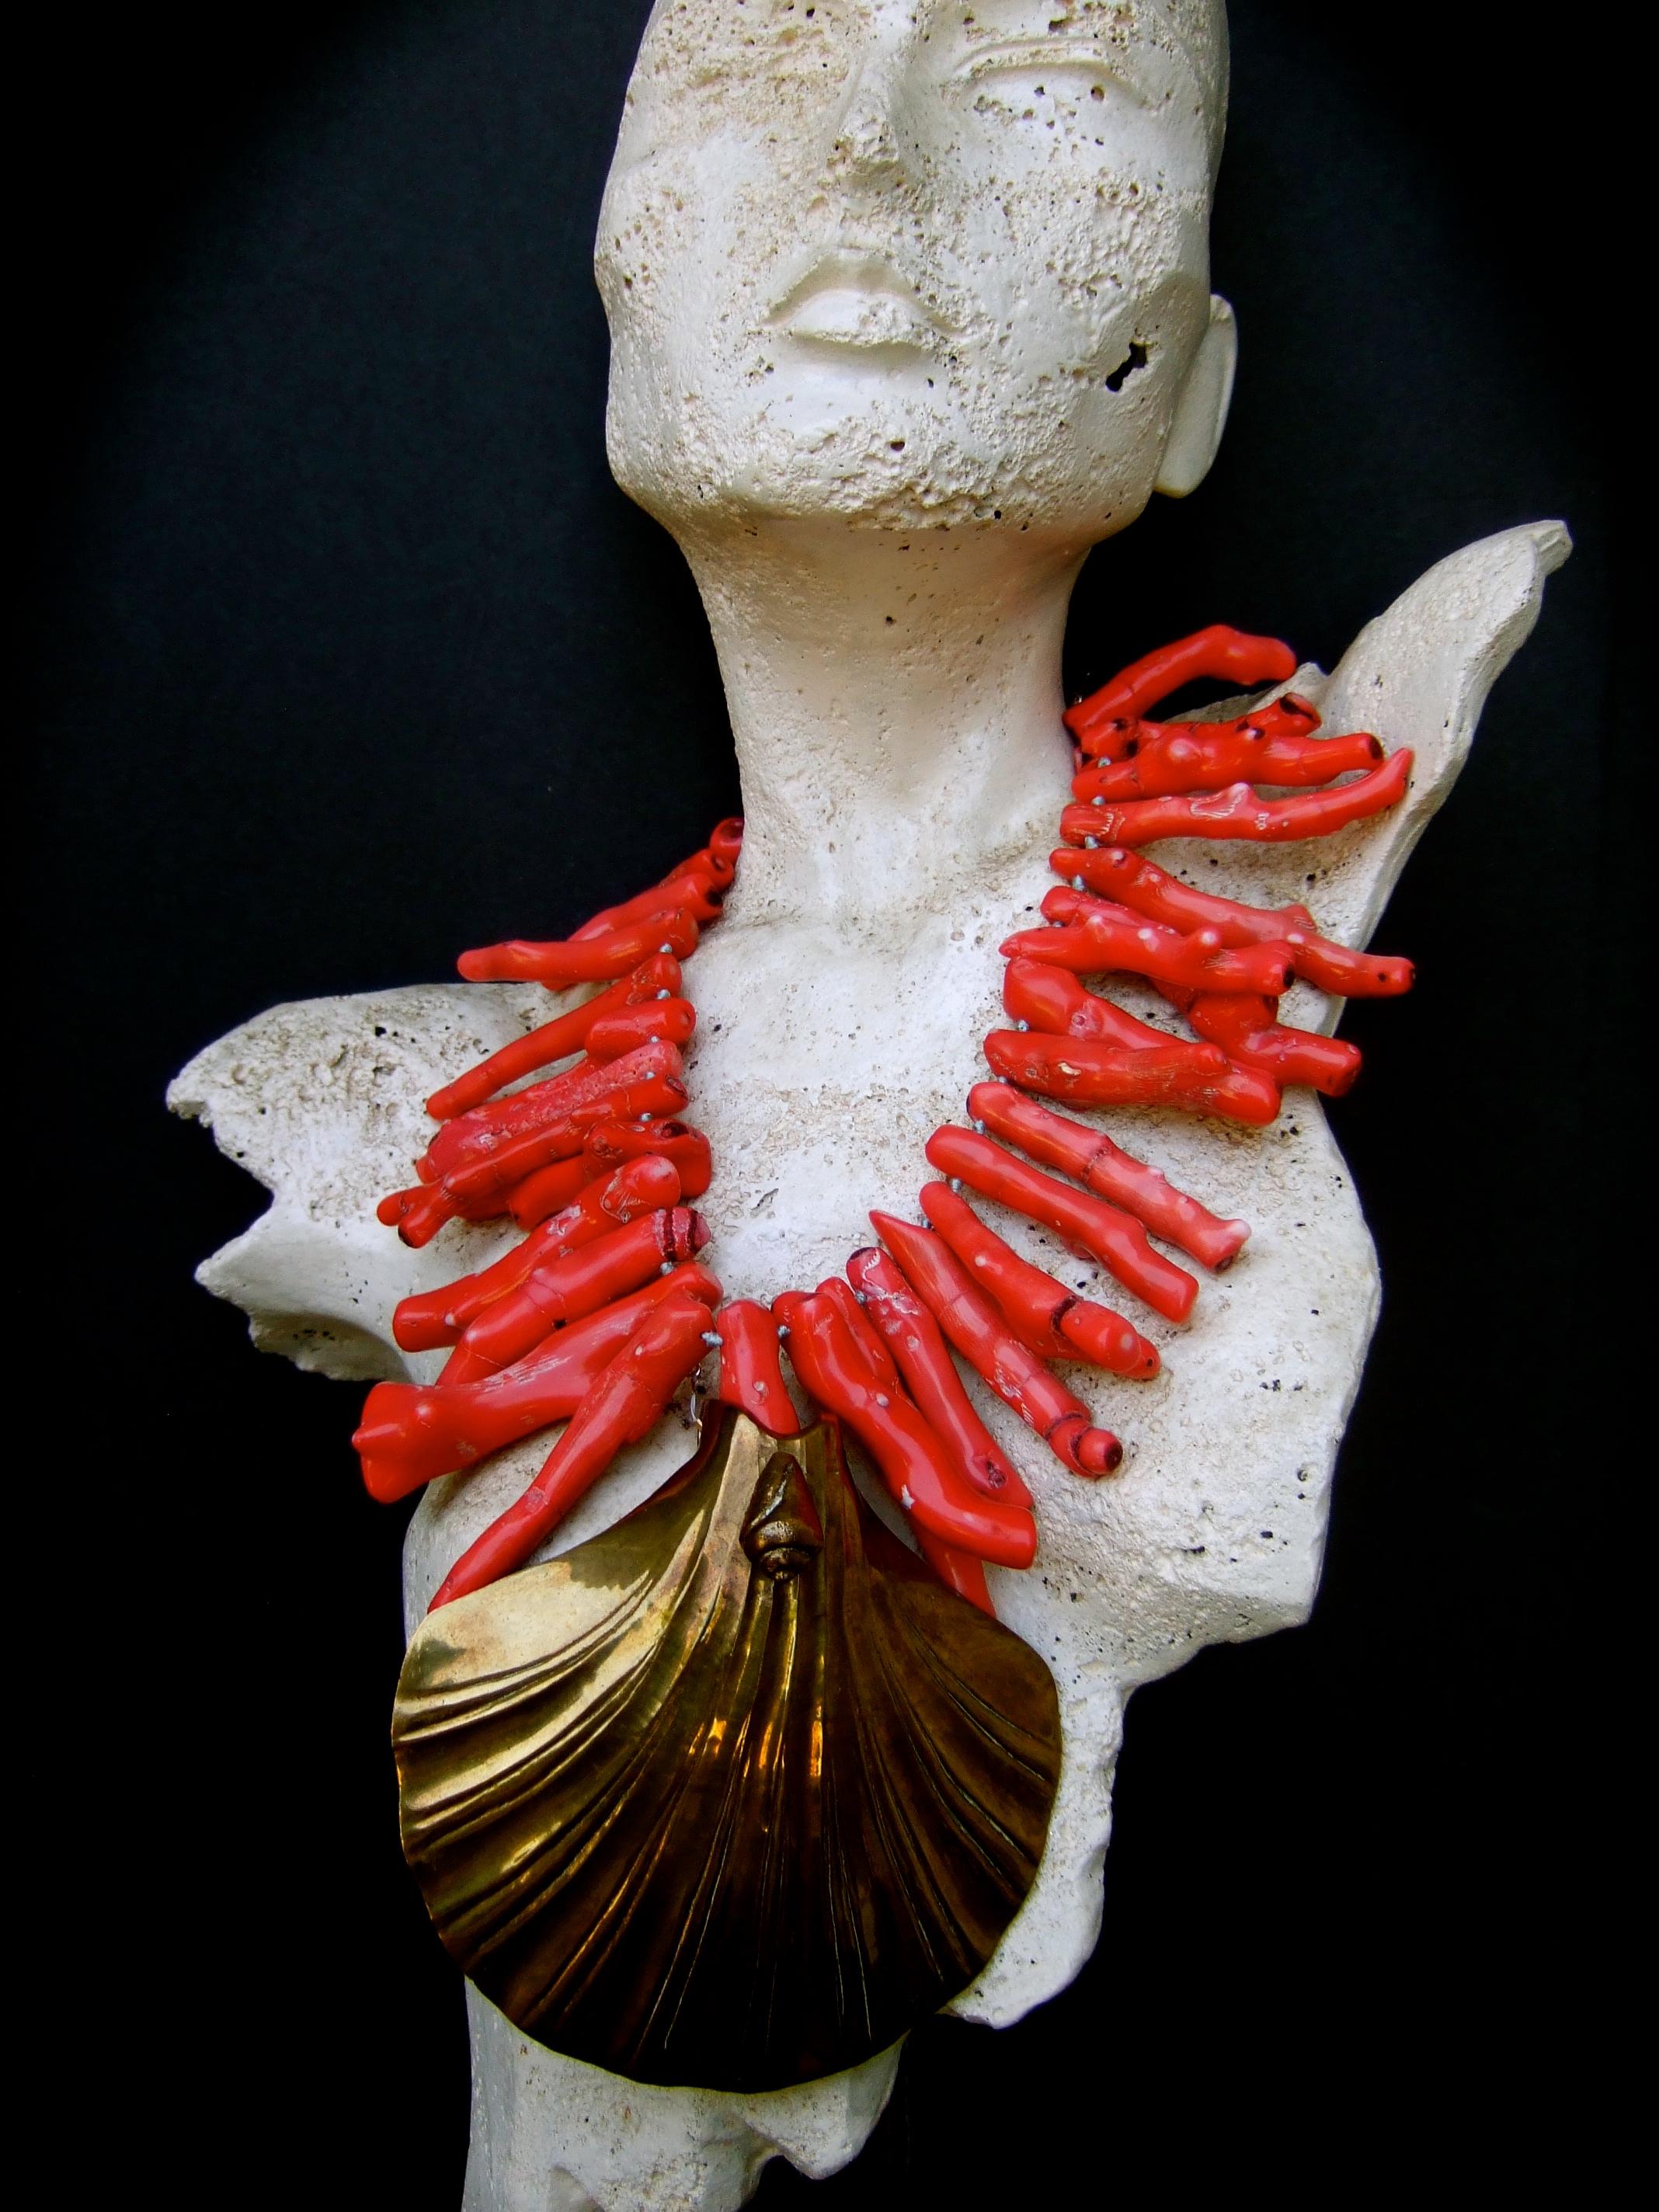 Extraordinary massive coral branch artisan statement necklace 
The avant-garde huge scale necklace is designed with a collection 
of large-scale elongated organic coral branches

Juxtaposed with a huge stylized brass metal scallop shell medallion